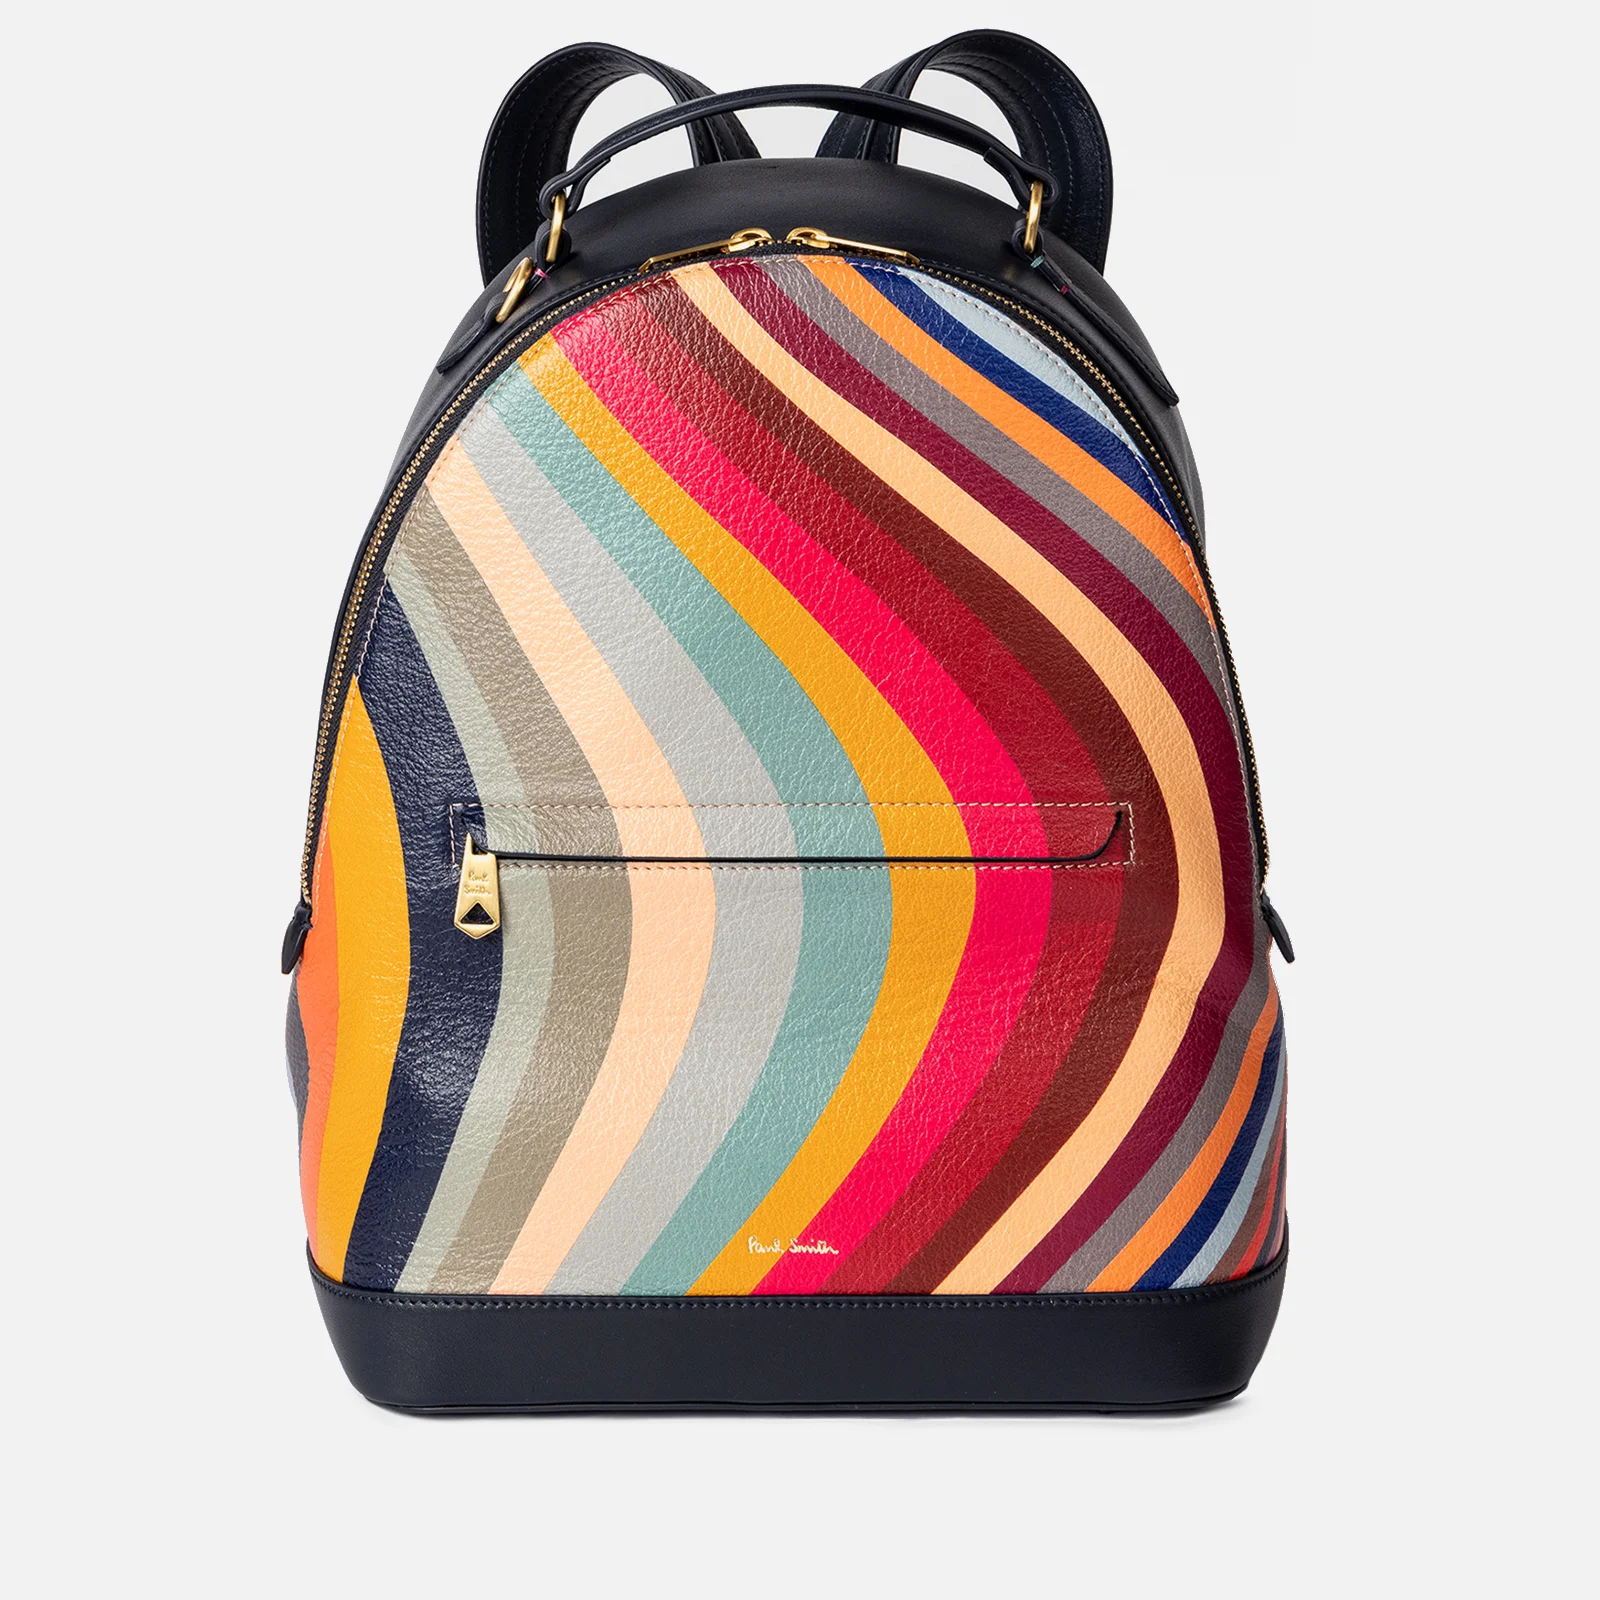 Paul Smith Swirl Striped Leather Backpack Image 1